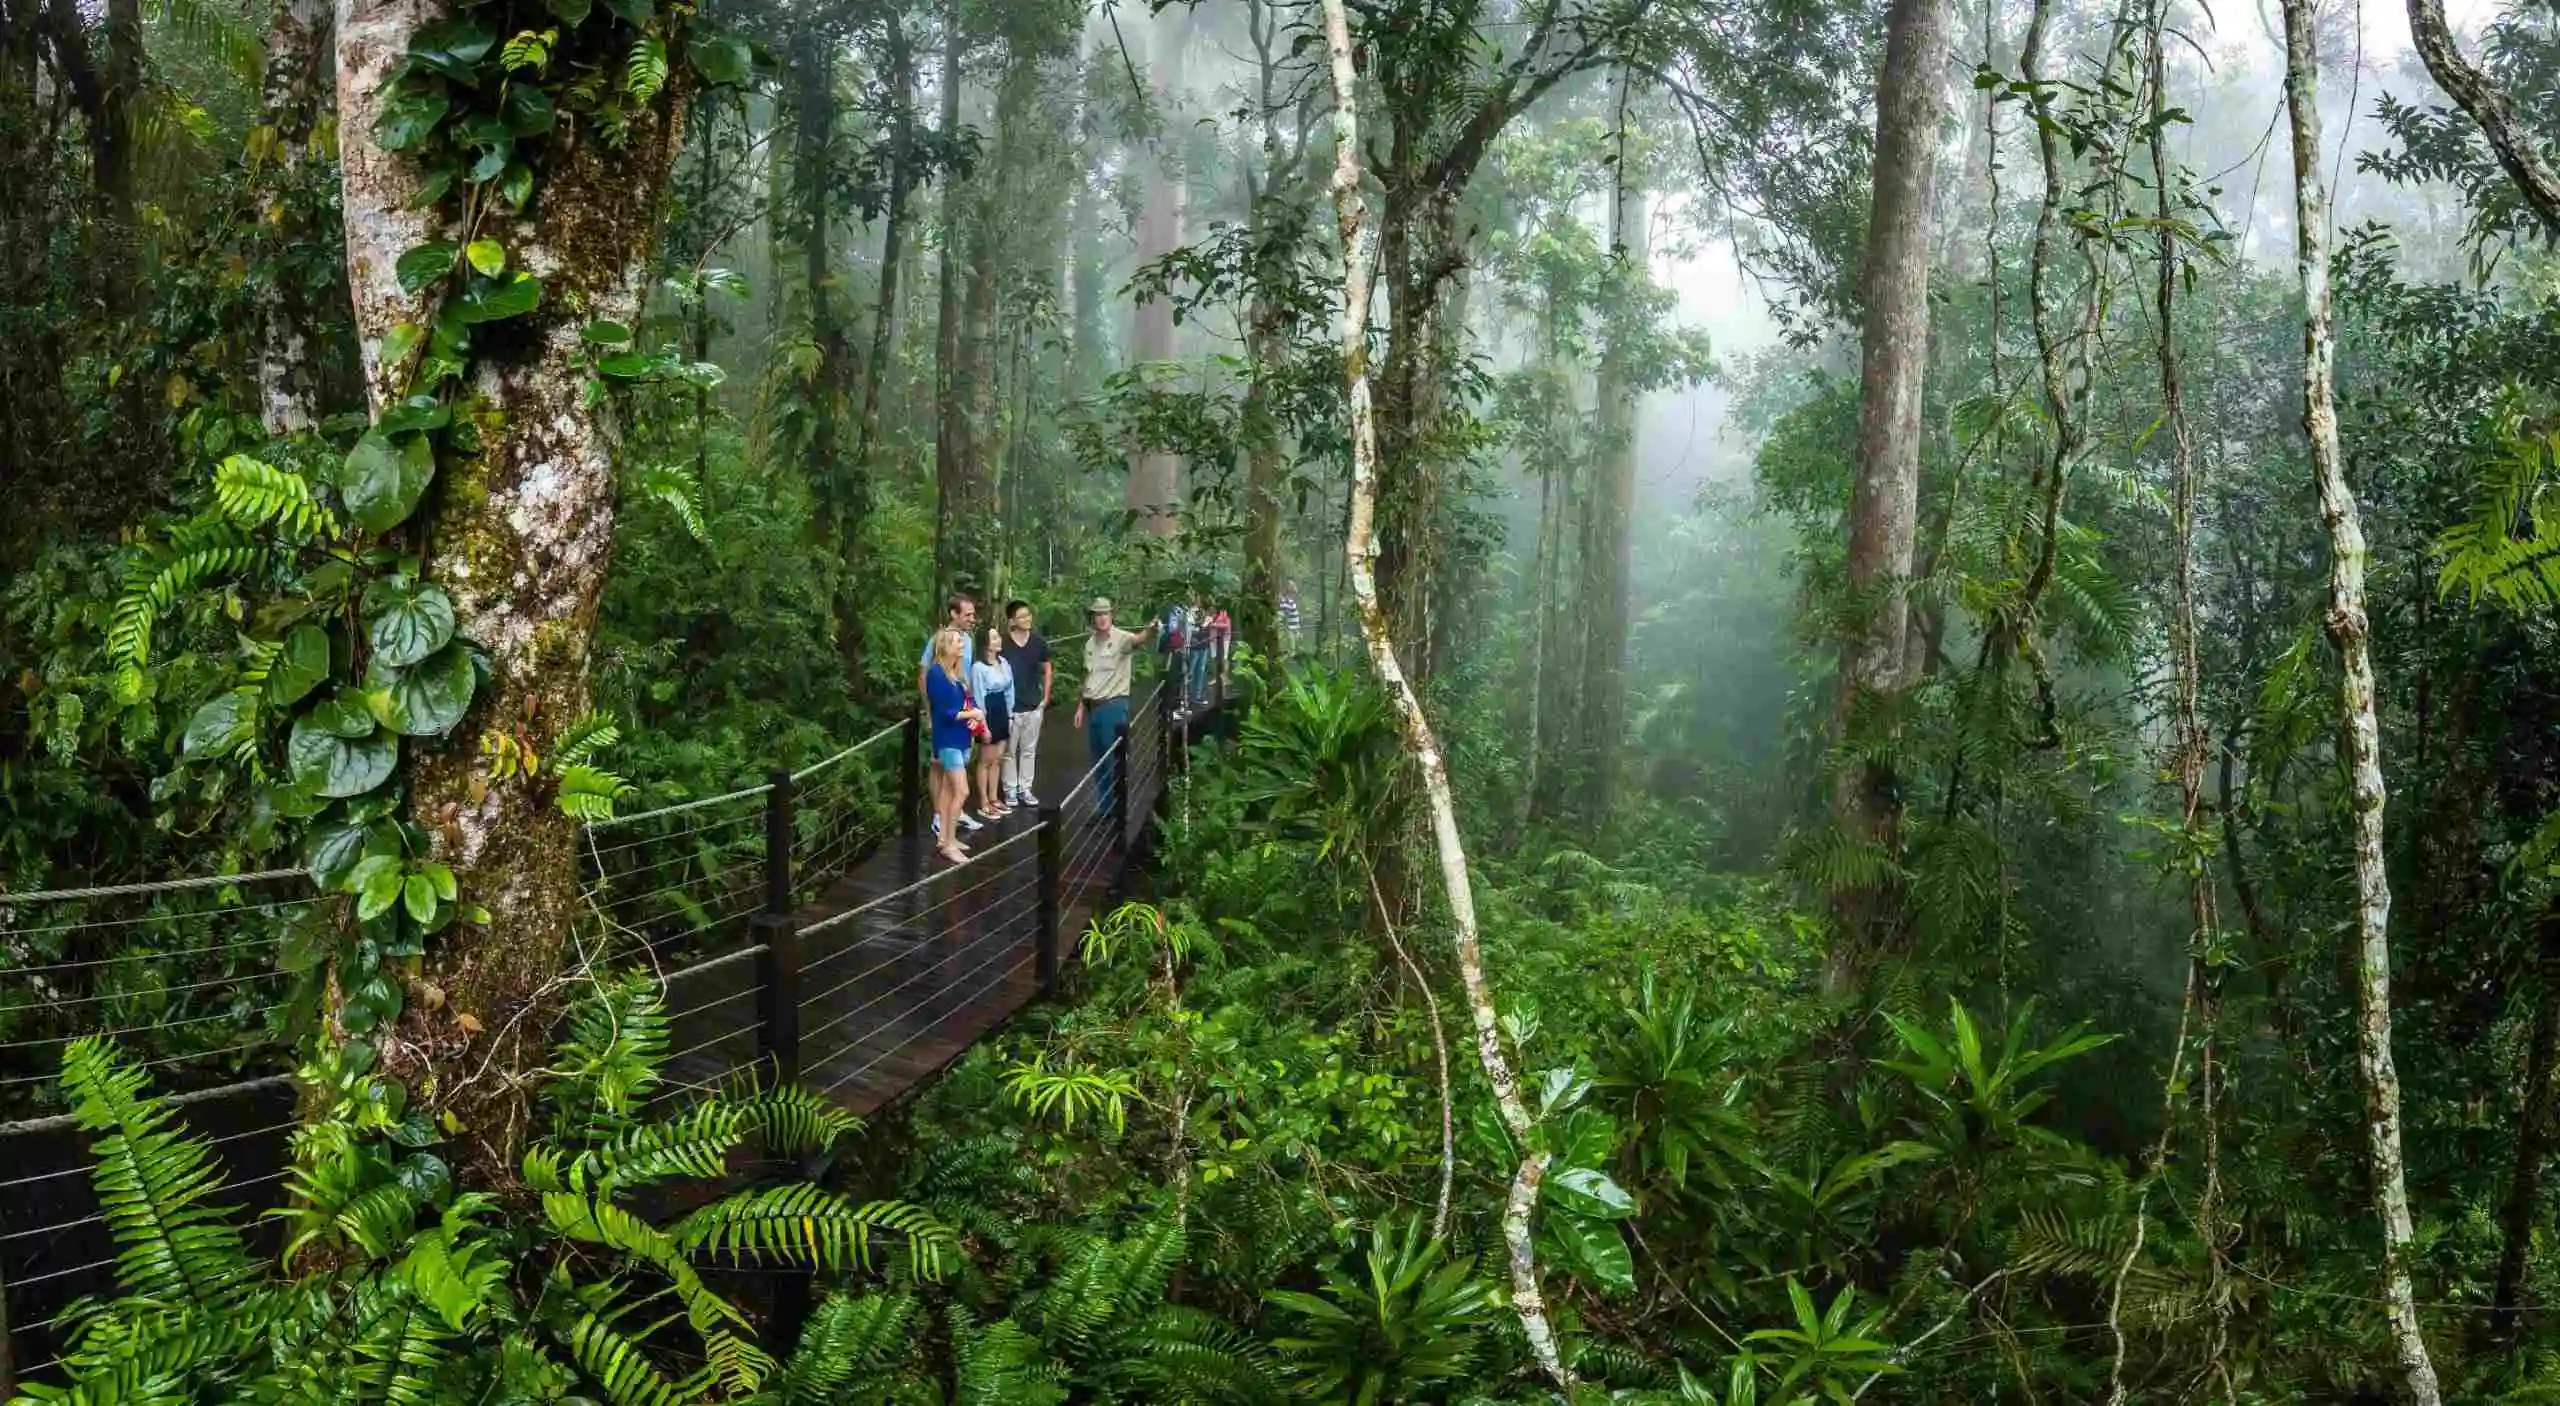 A ranger stands on a boardwalk in the rain forest pointing up into the tress with a group of guests